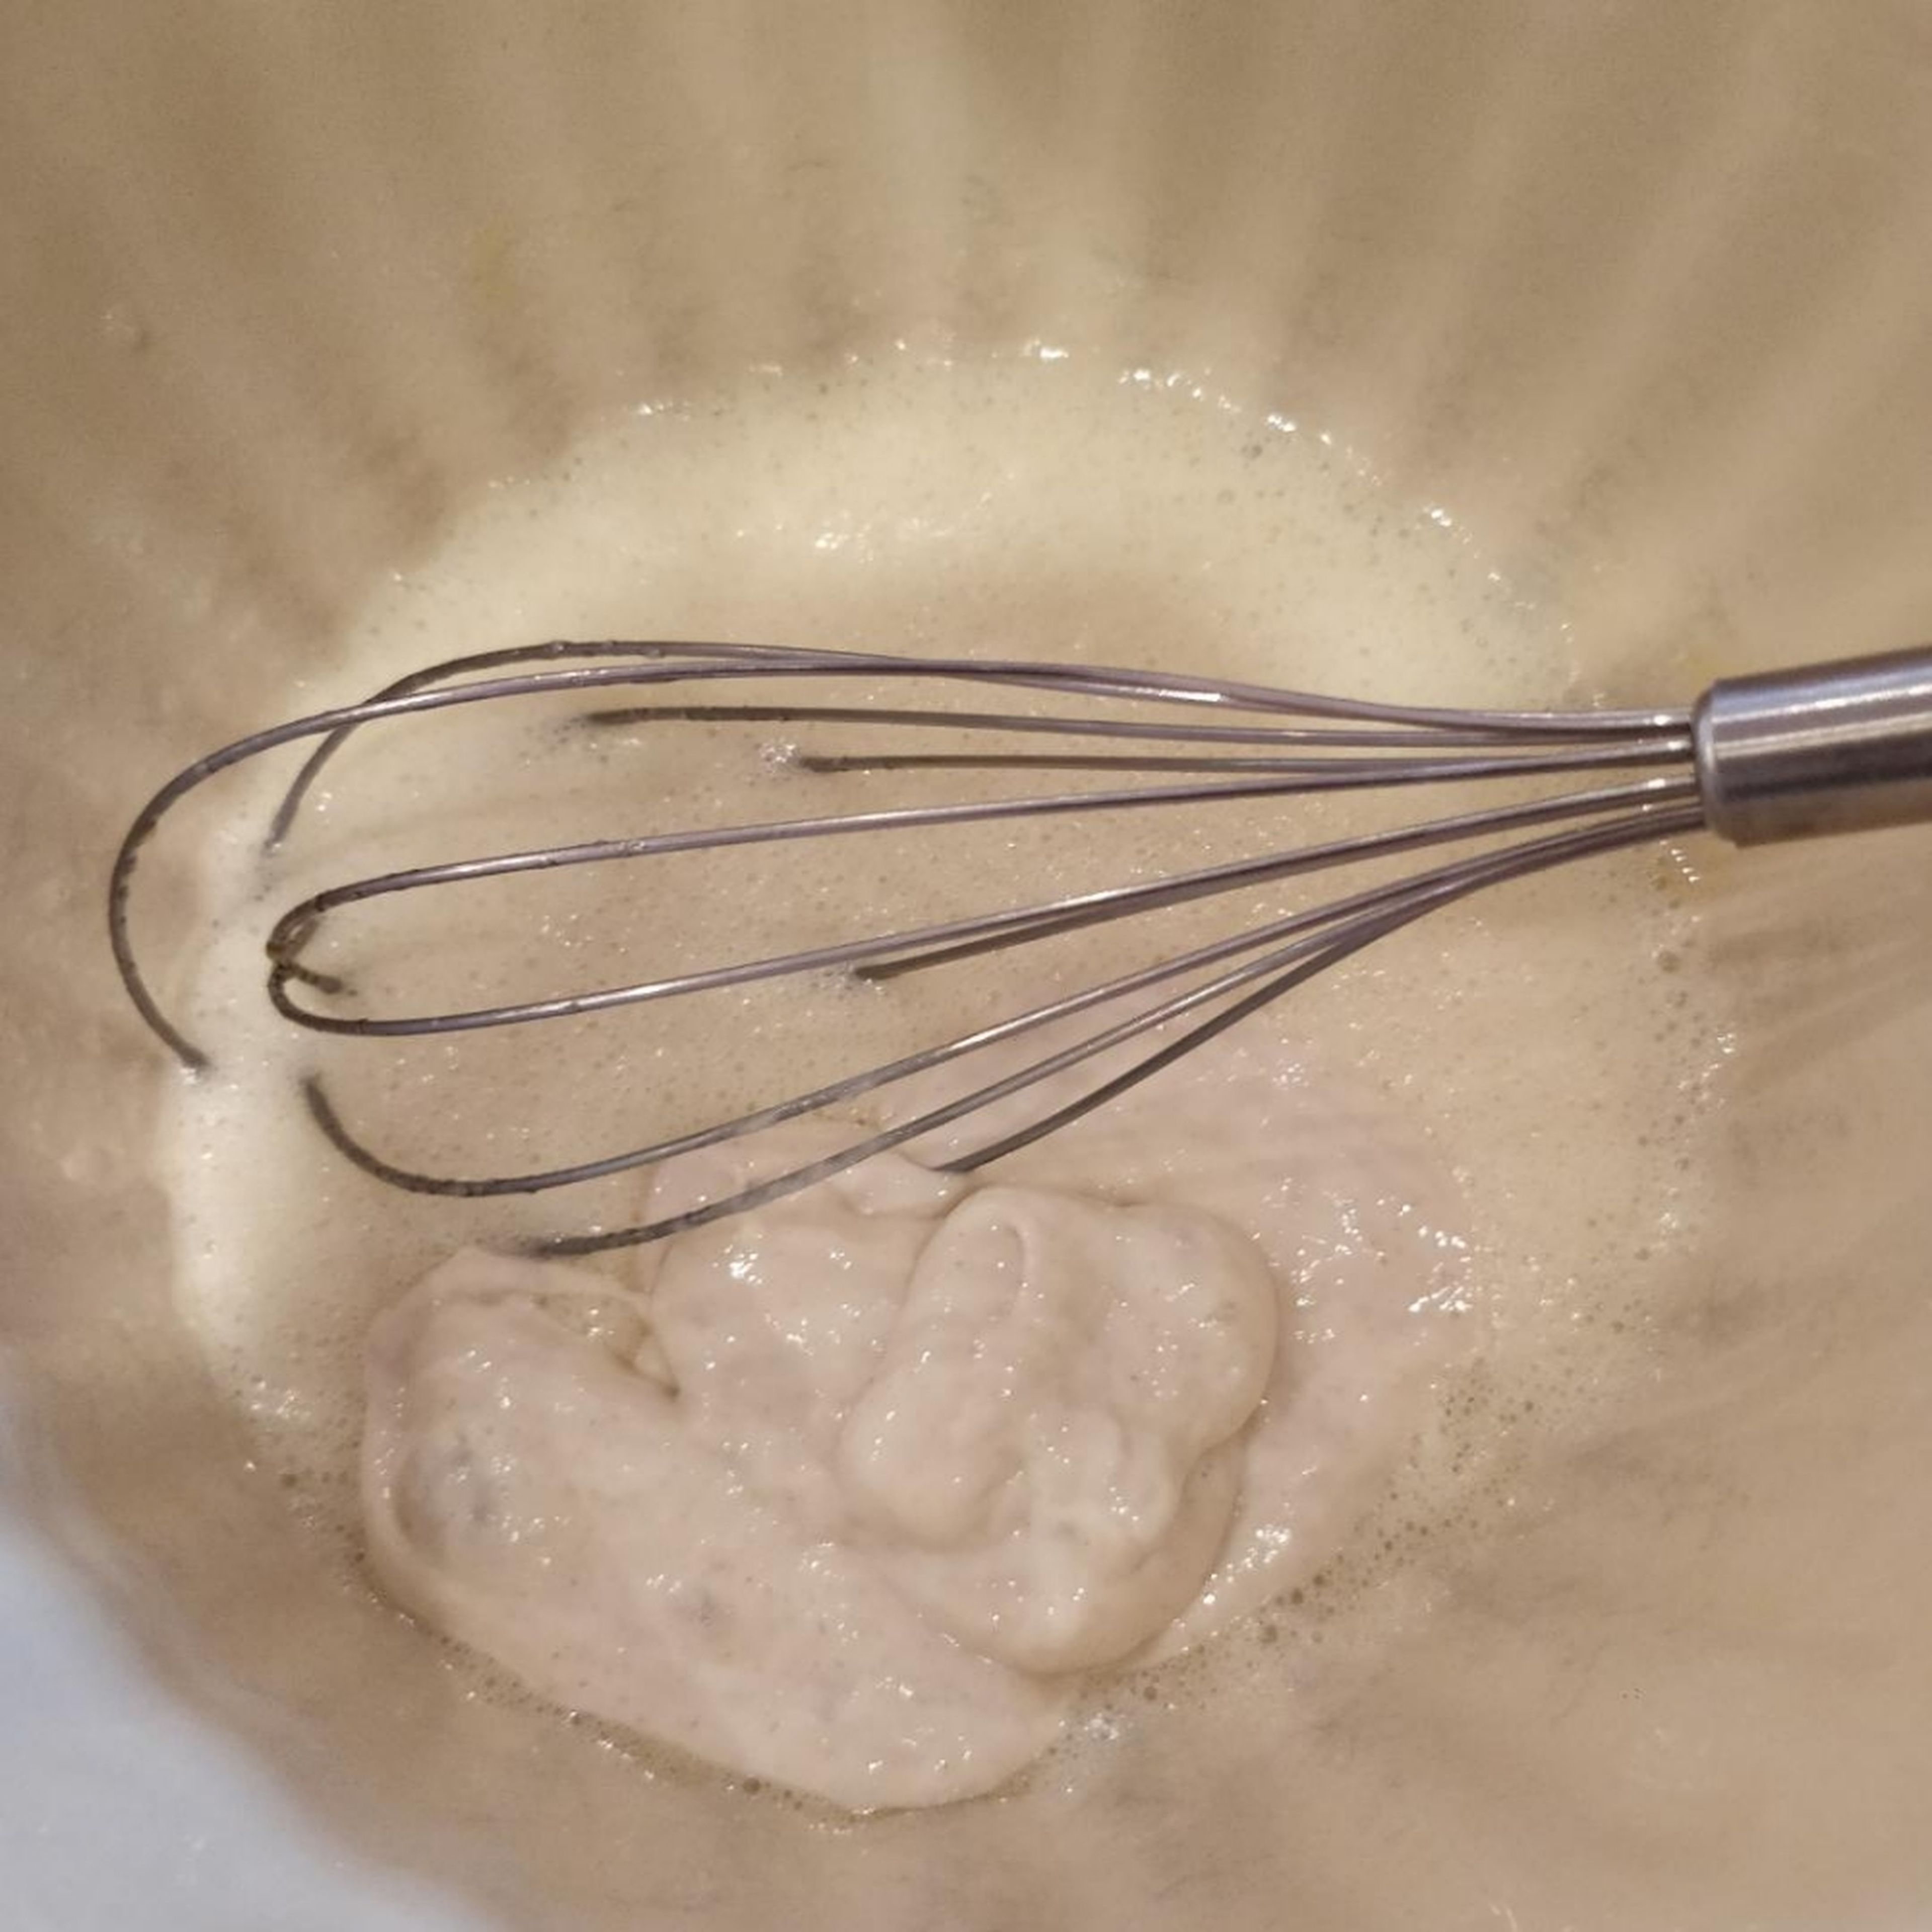 Whisk in the sourdough discard until you have a smooth batter